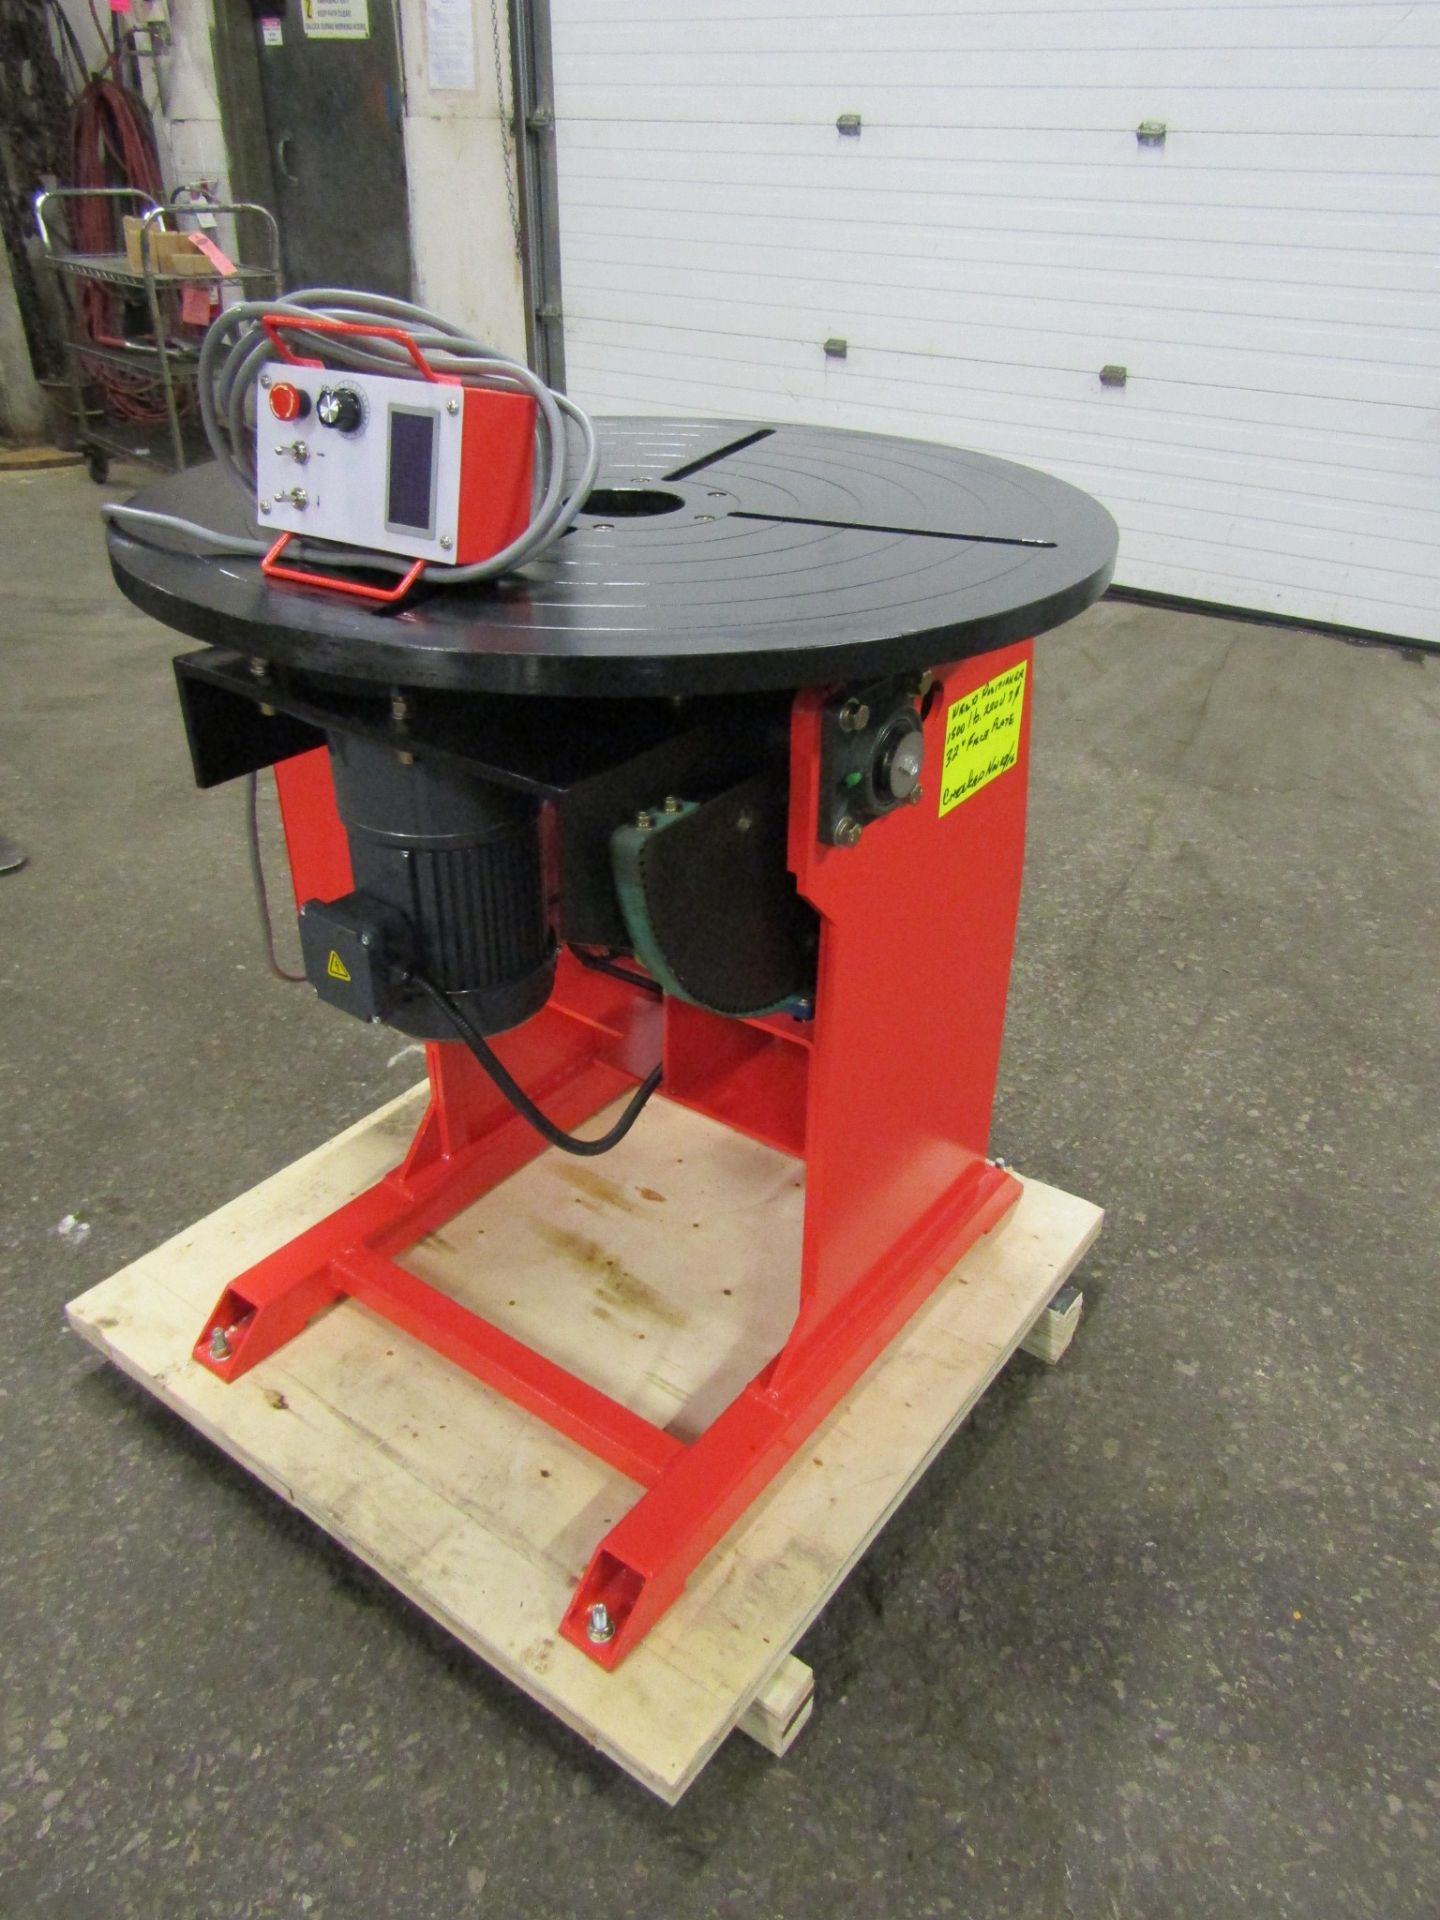 Verner model VD-1500 WELDING POSITIONER 1500lbs capacity - tilt and rotate with variable speed drive